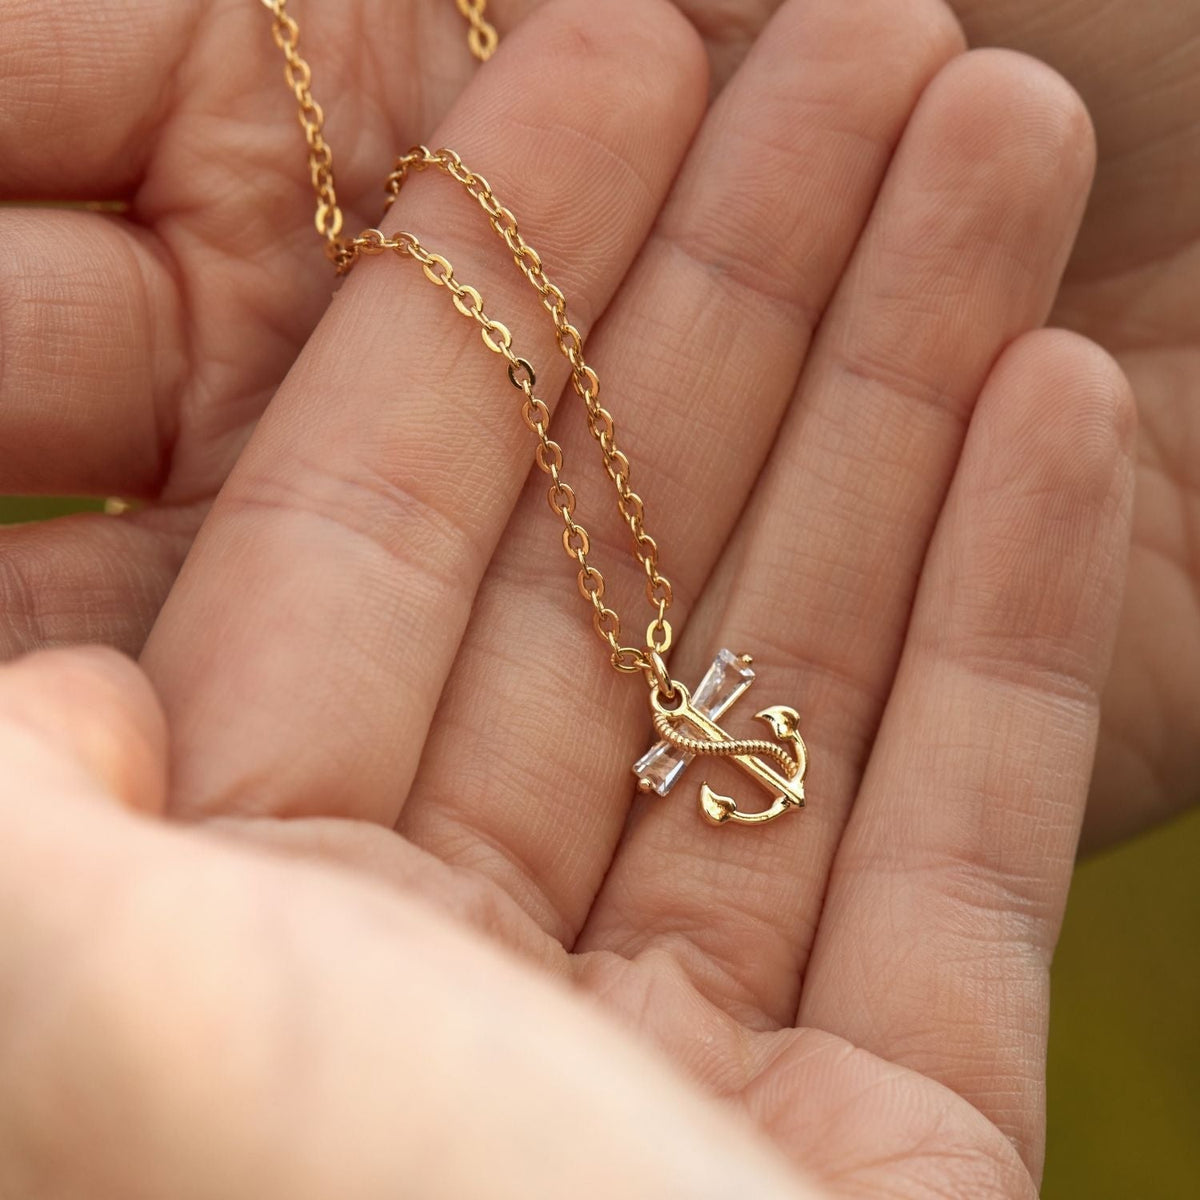 To My Beautiful Fiancé | Strongest, Bravest, Most Caring | Anchor Necklace